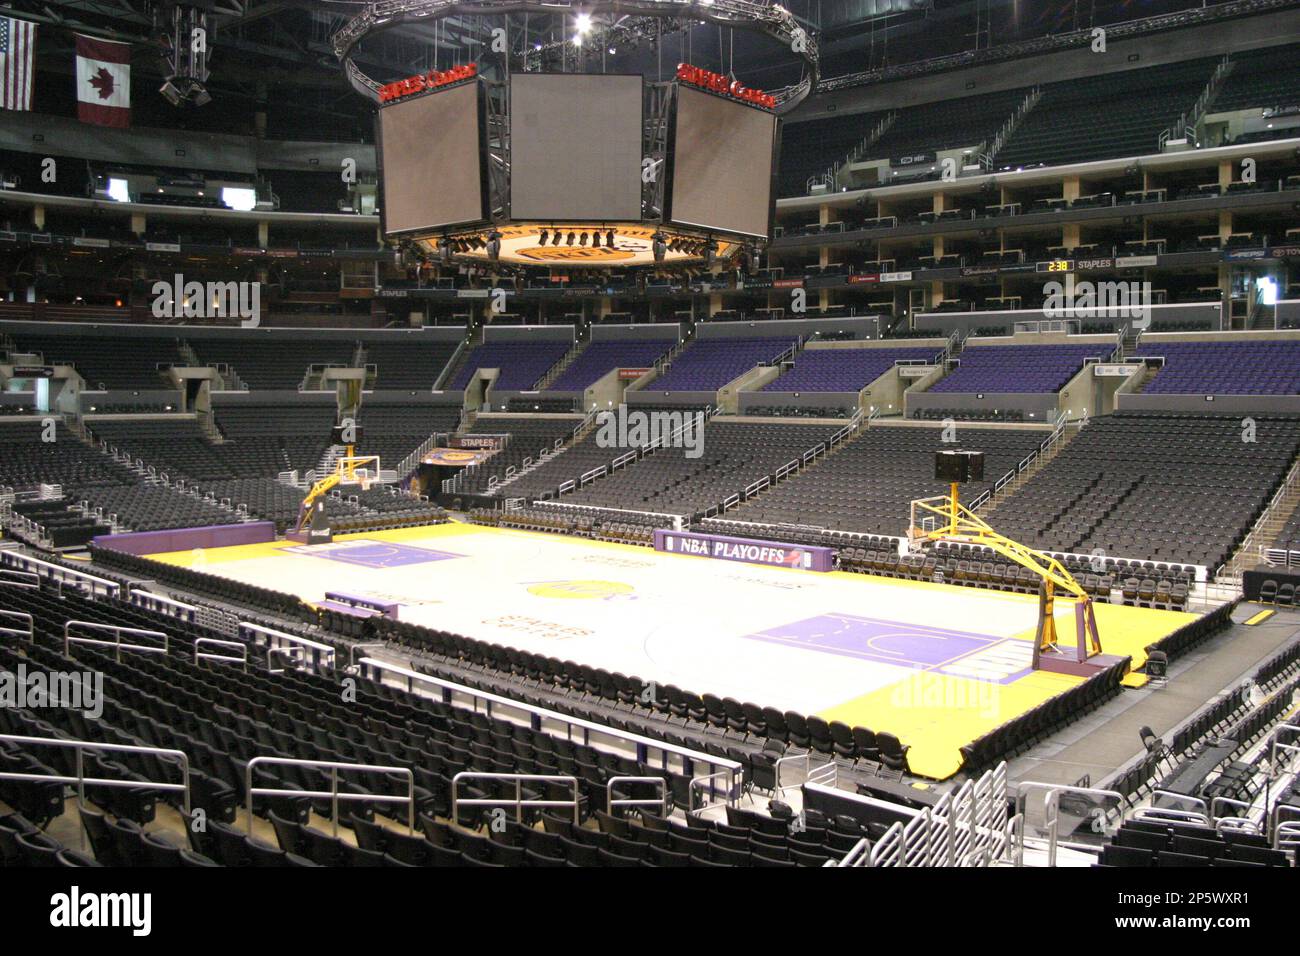 A look at Staples Center home of the Los Angeles Lakers, Los